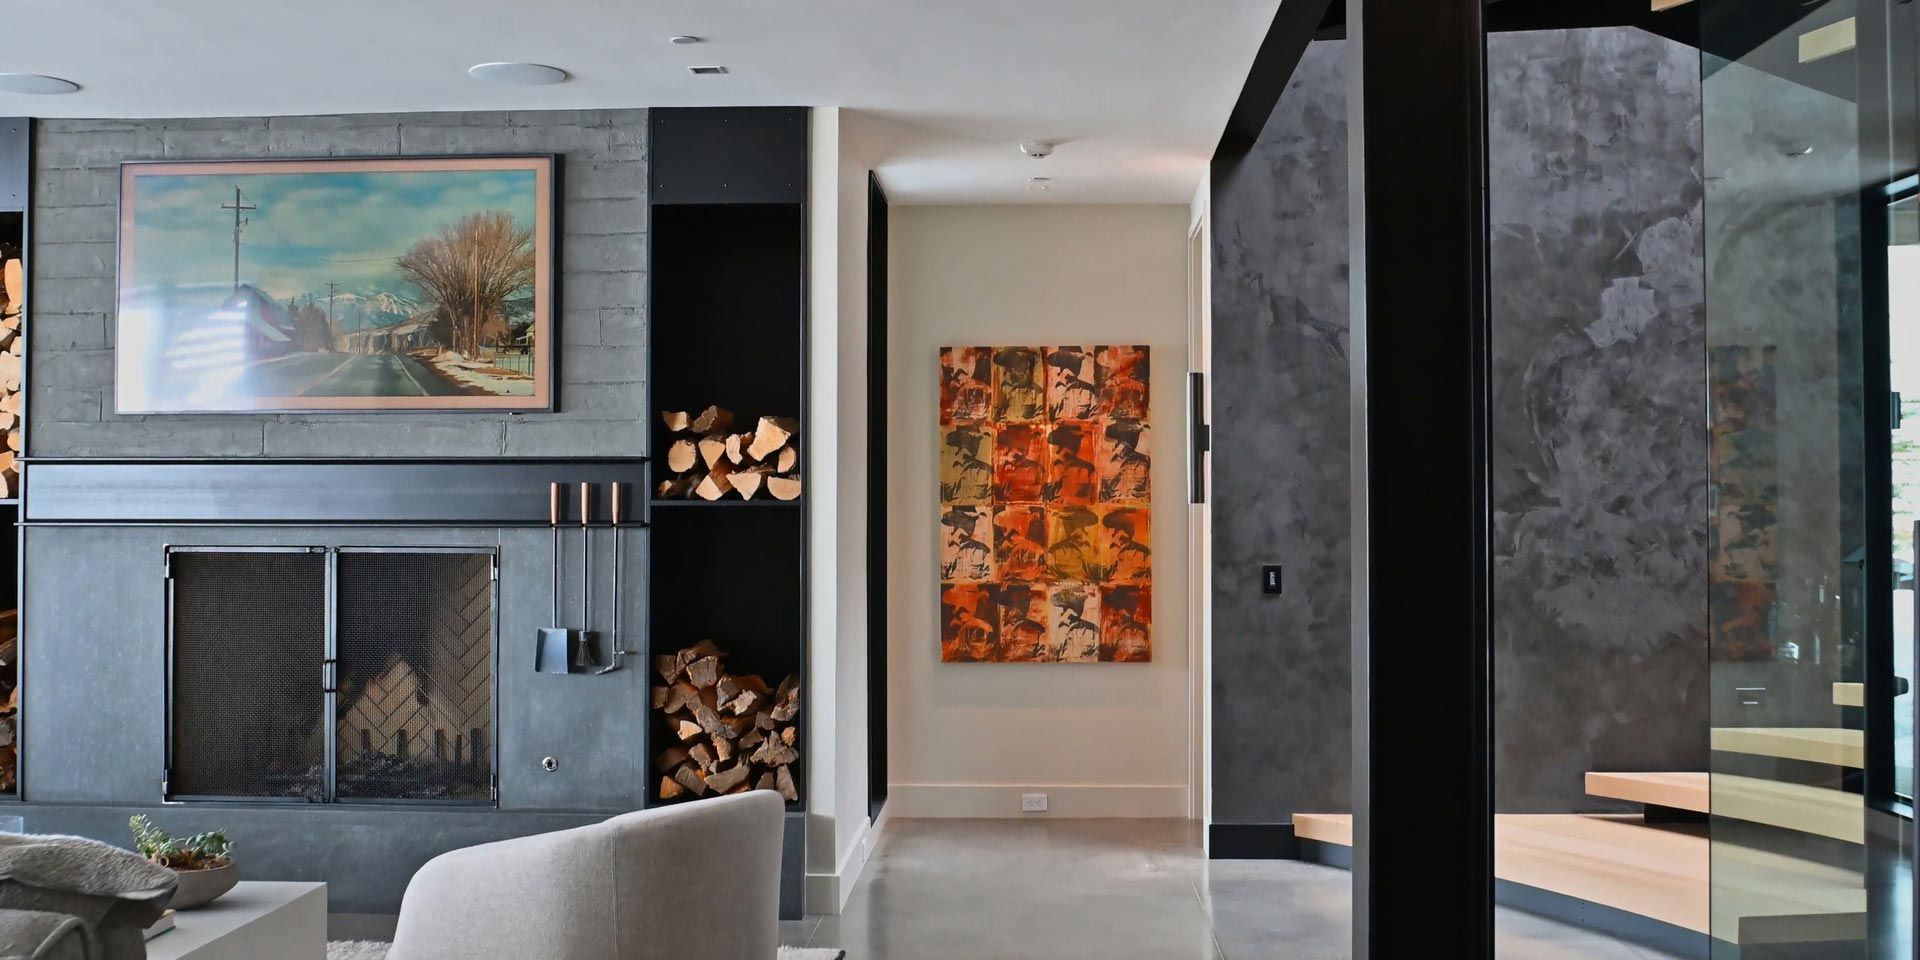 A stylish interior with a fireplace, log storage, and colorful artwork on the wall.